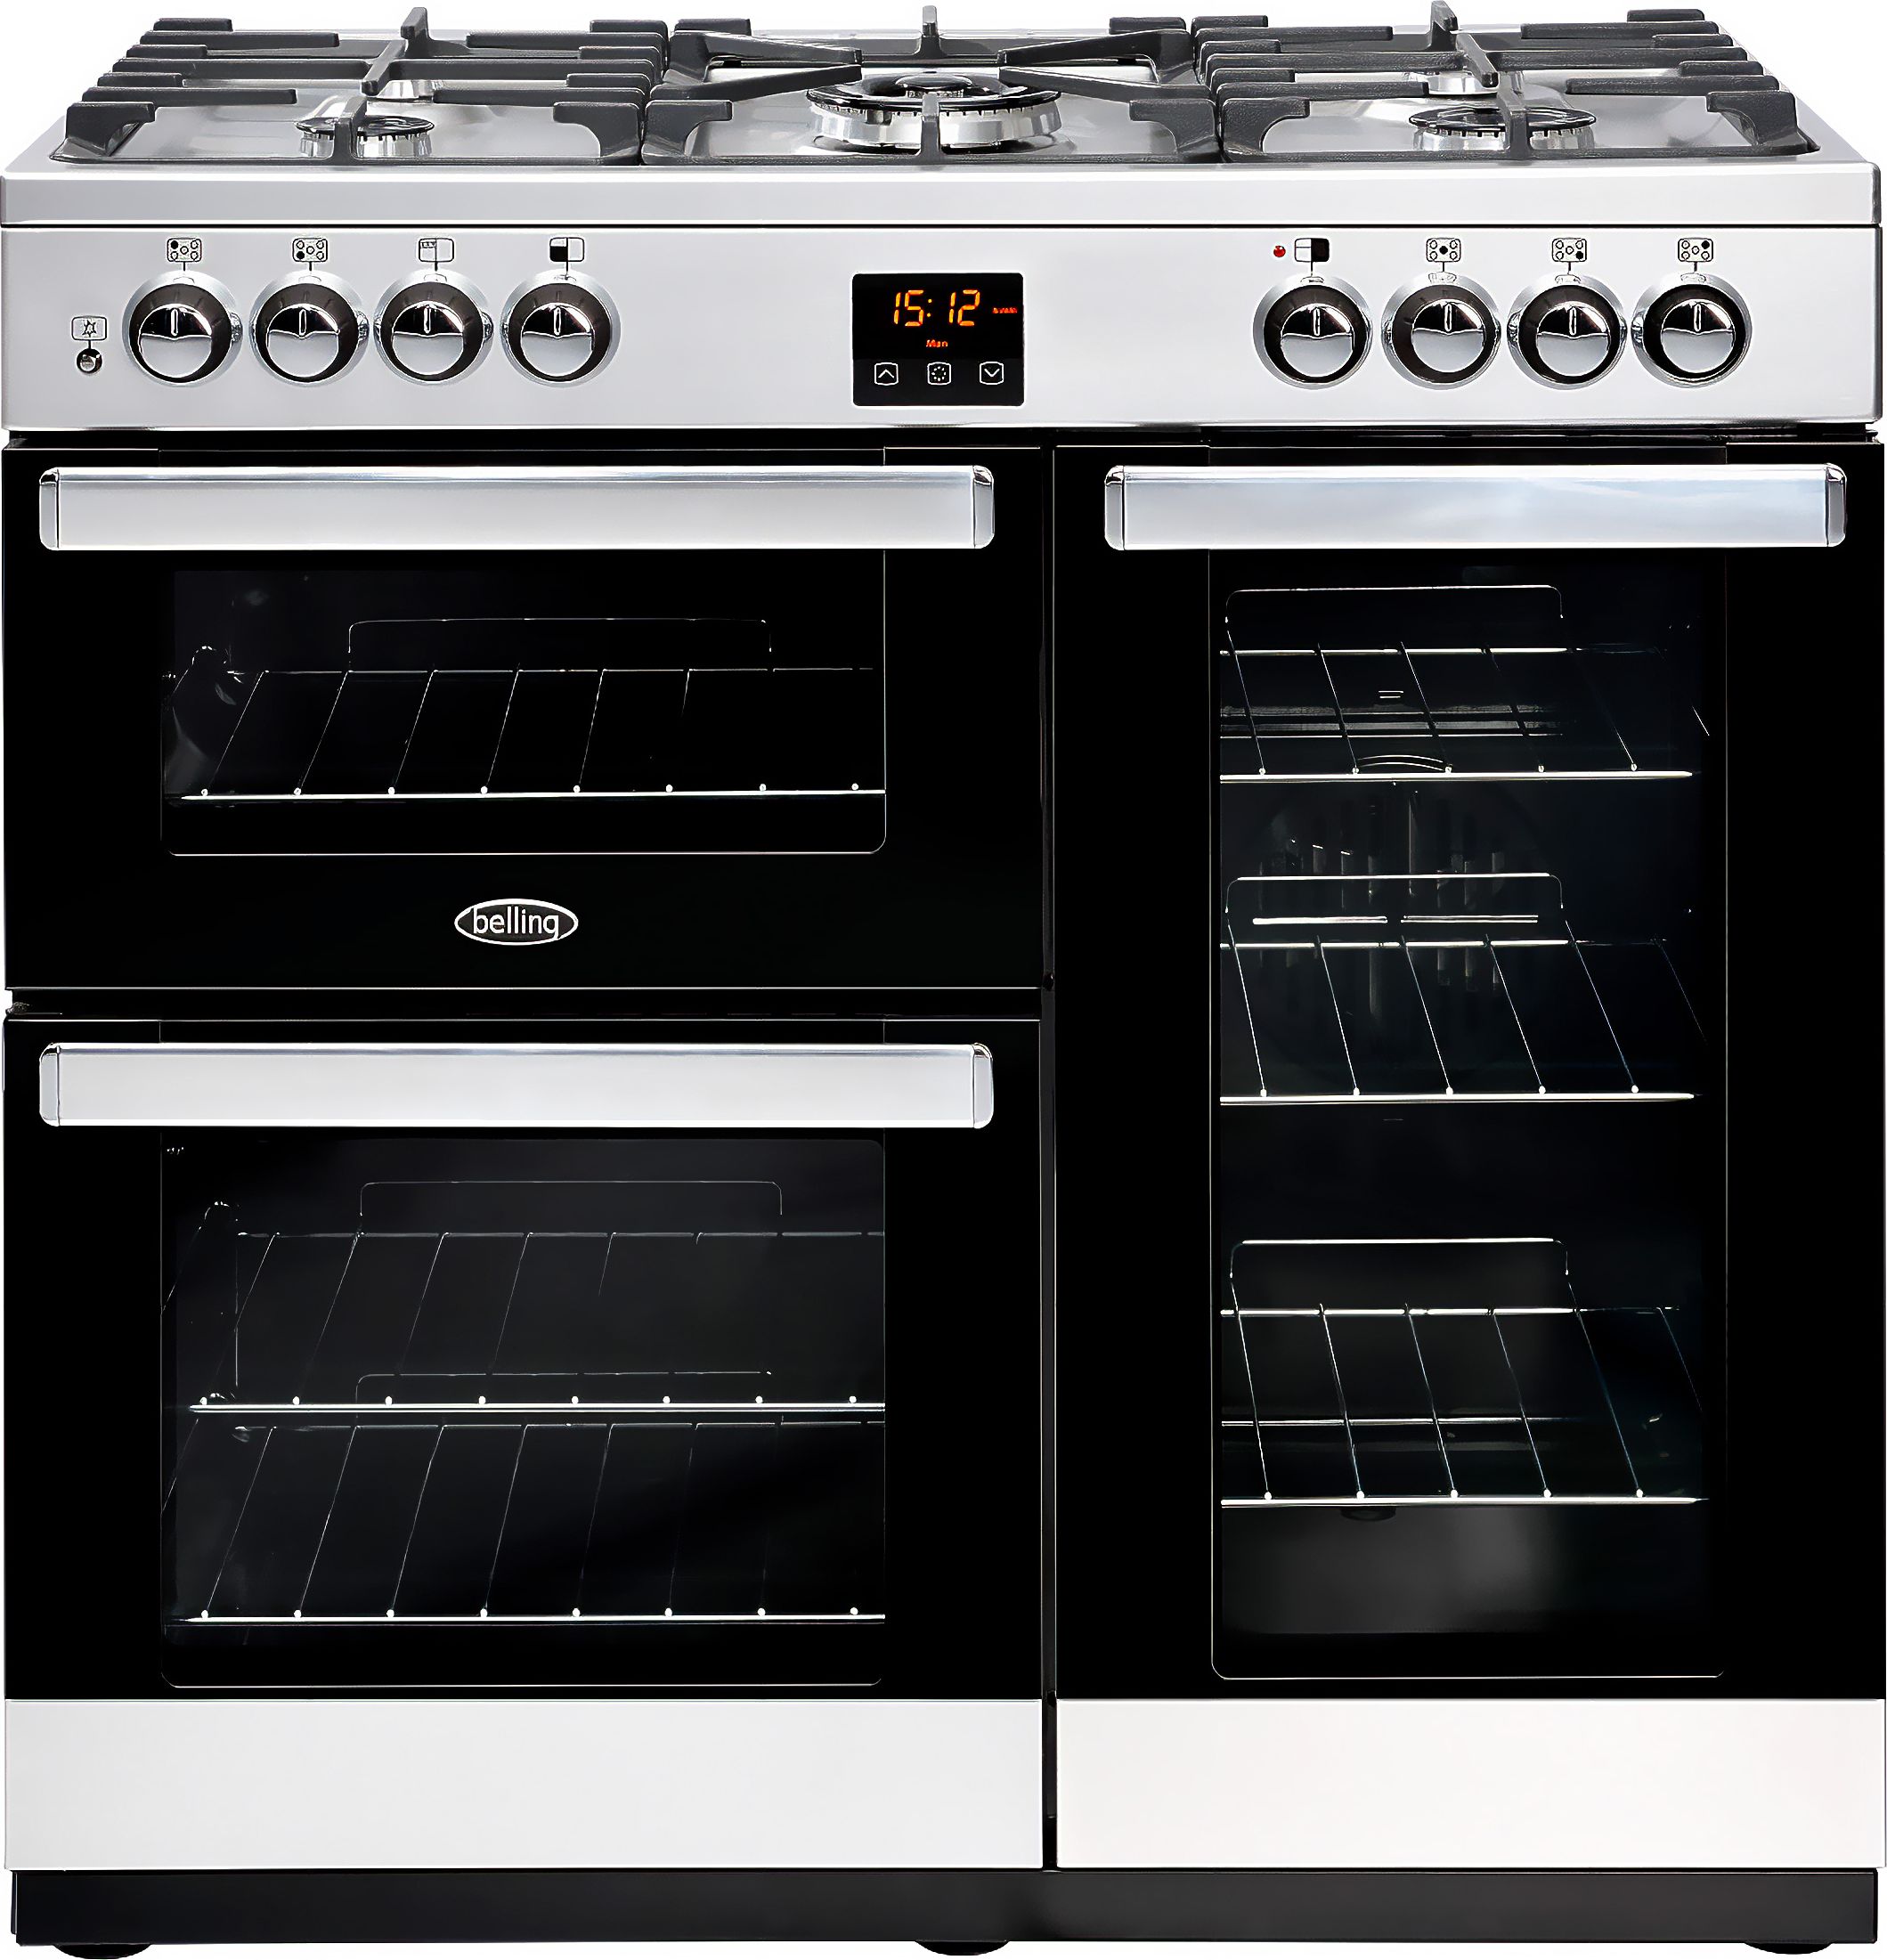 Belling CookcentreX90G 90cm Gas Range Cooker with Electric Fan Oven - Stainless Steel - A/A Rated, Stainless Steel